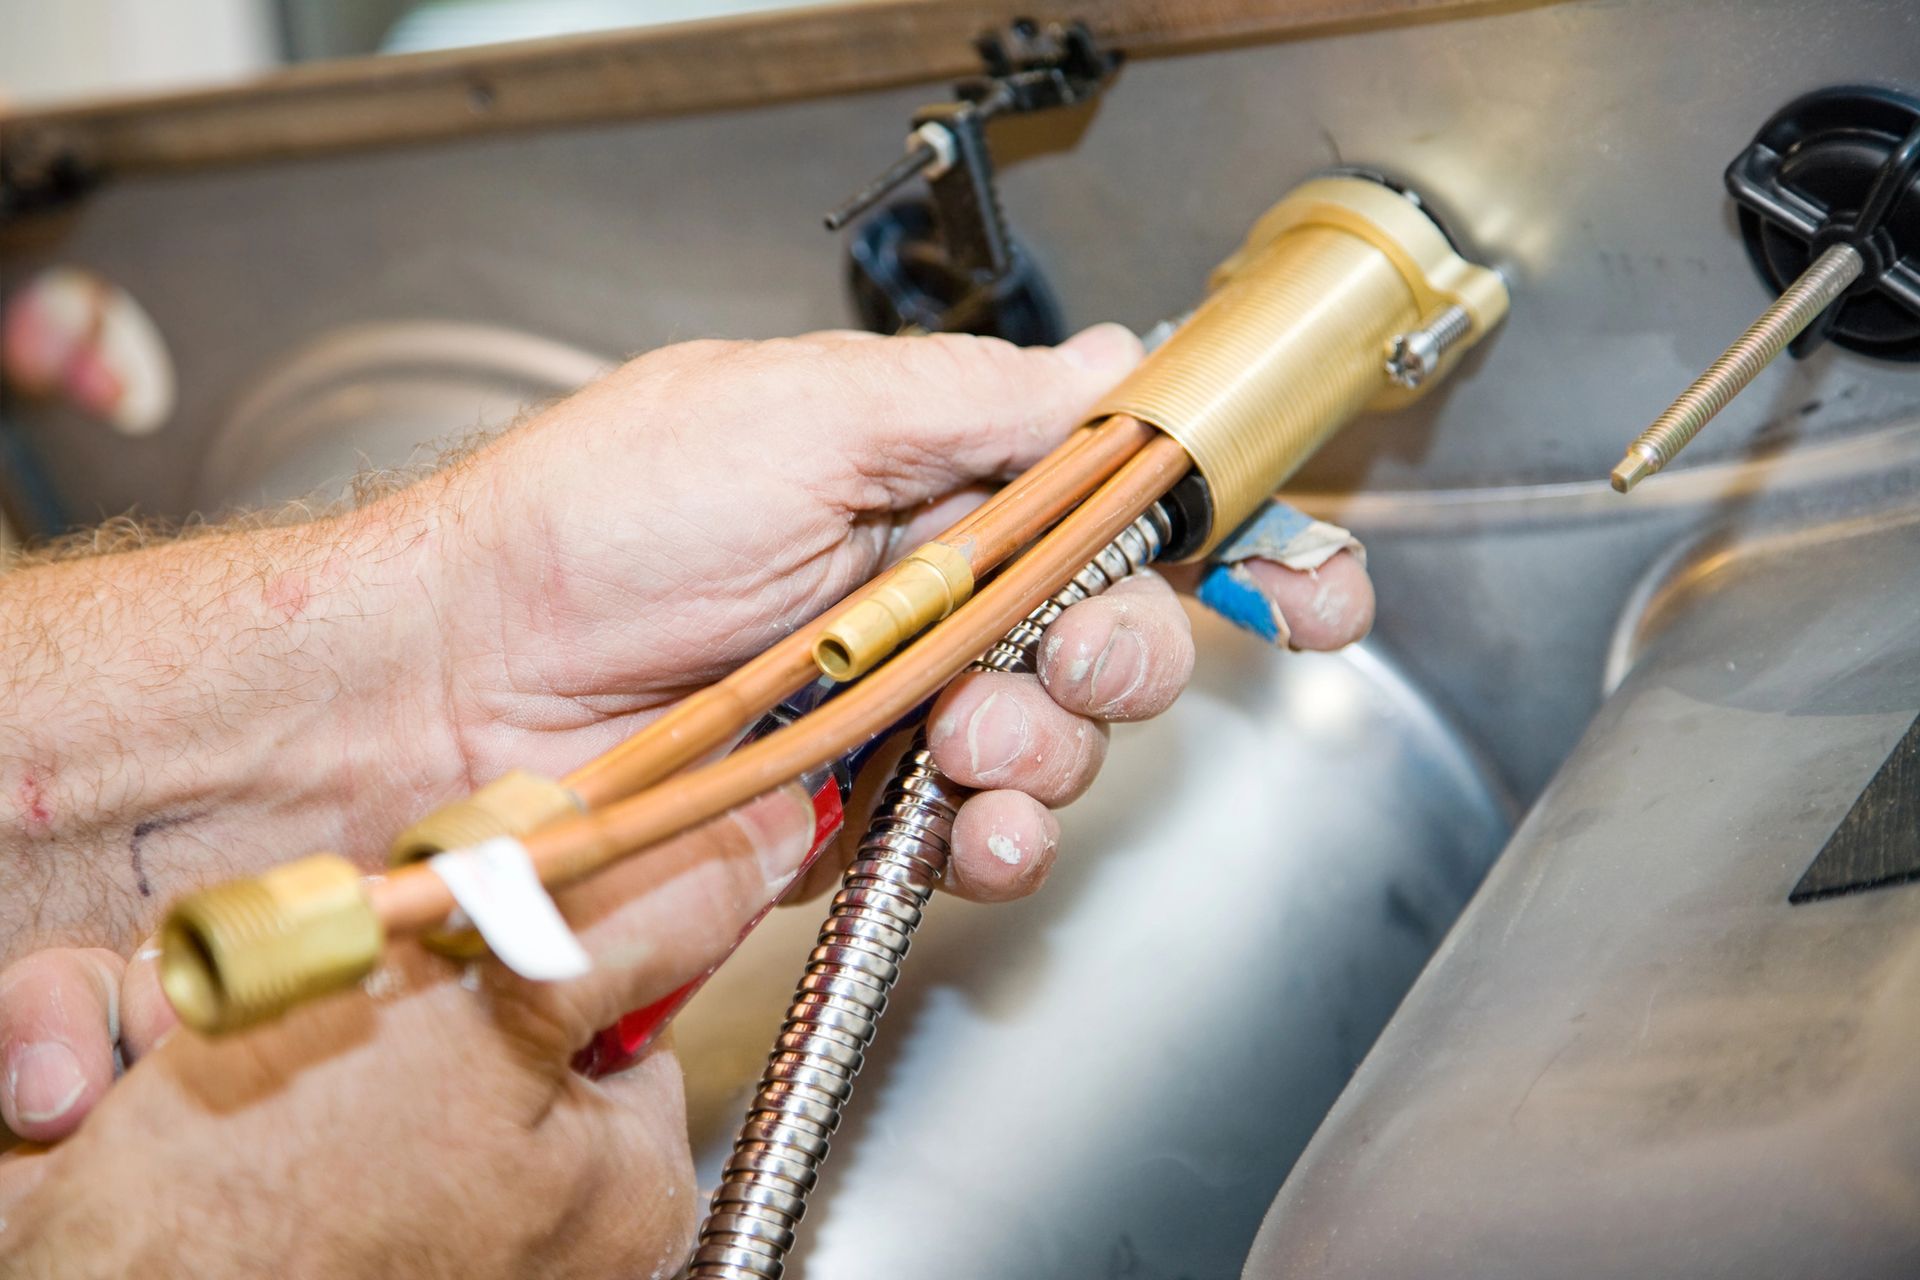 Plumbing Services in New Braunfels, TX